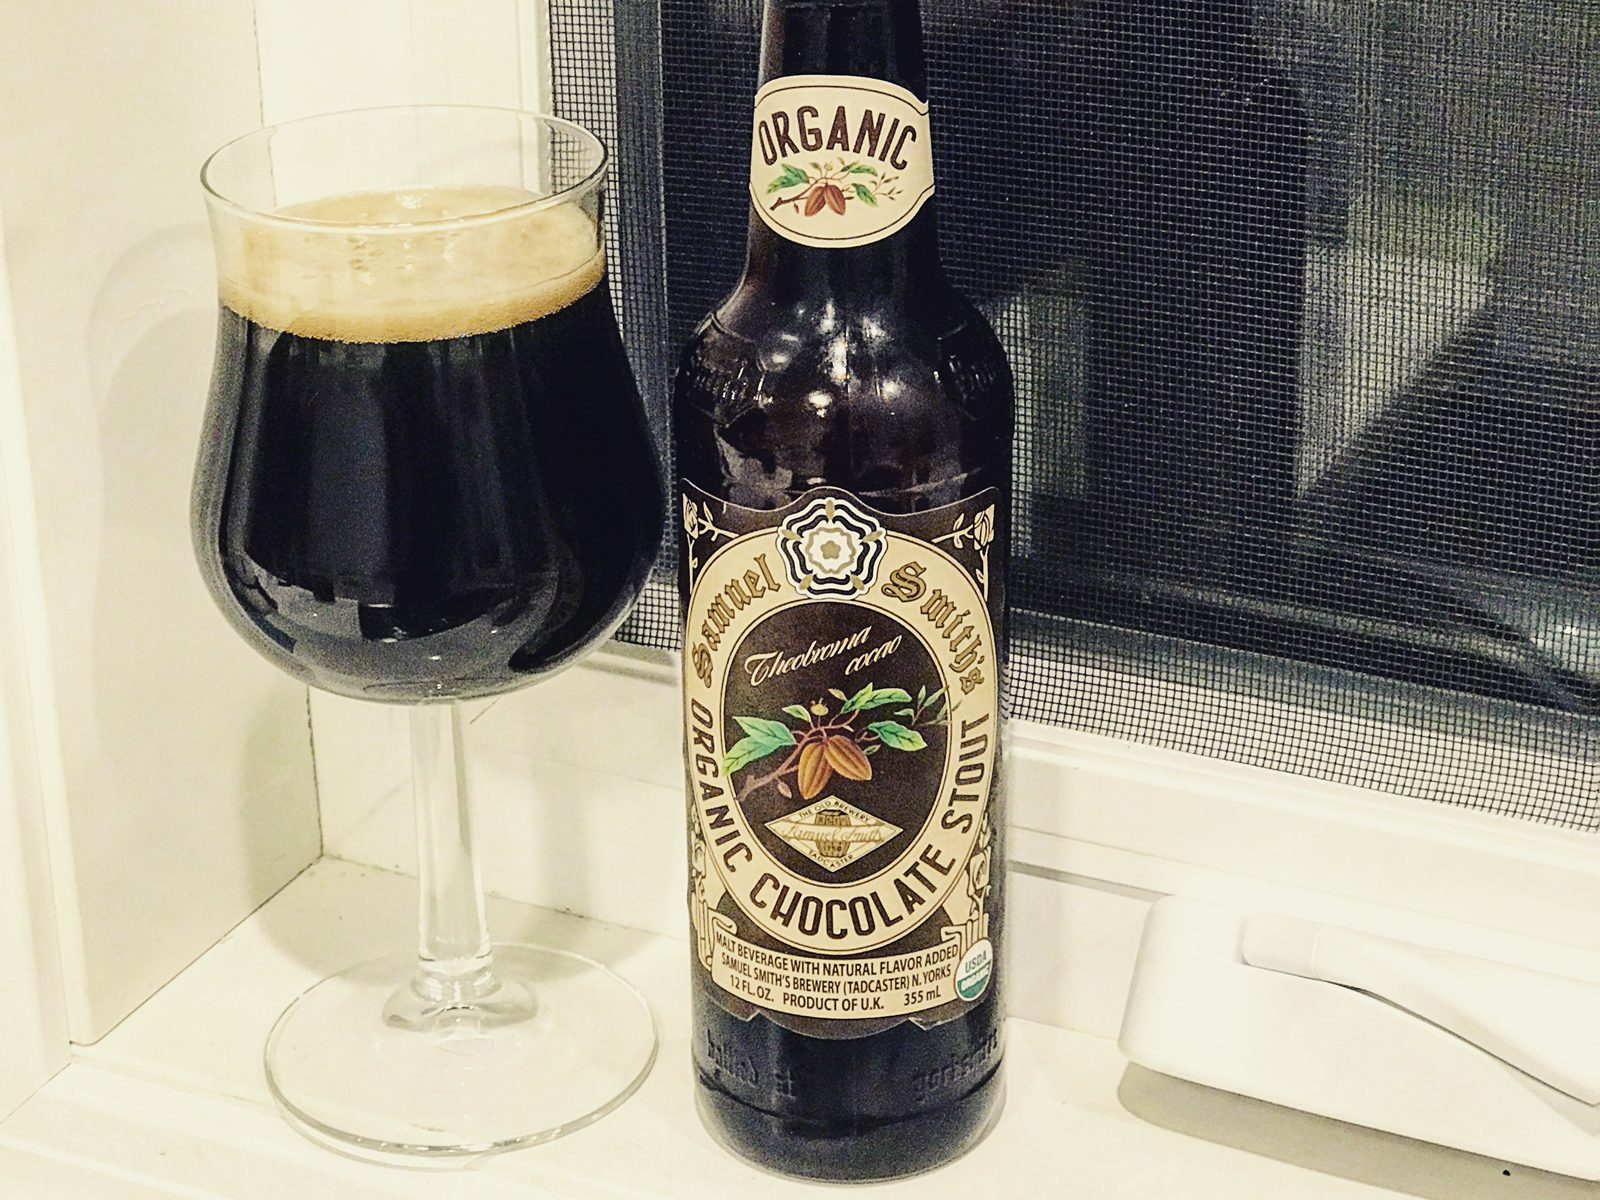 Samuel Smith's Old Brewery: Organic Chocolate Stout